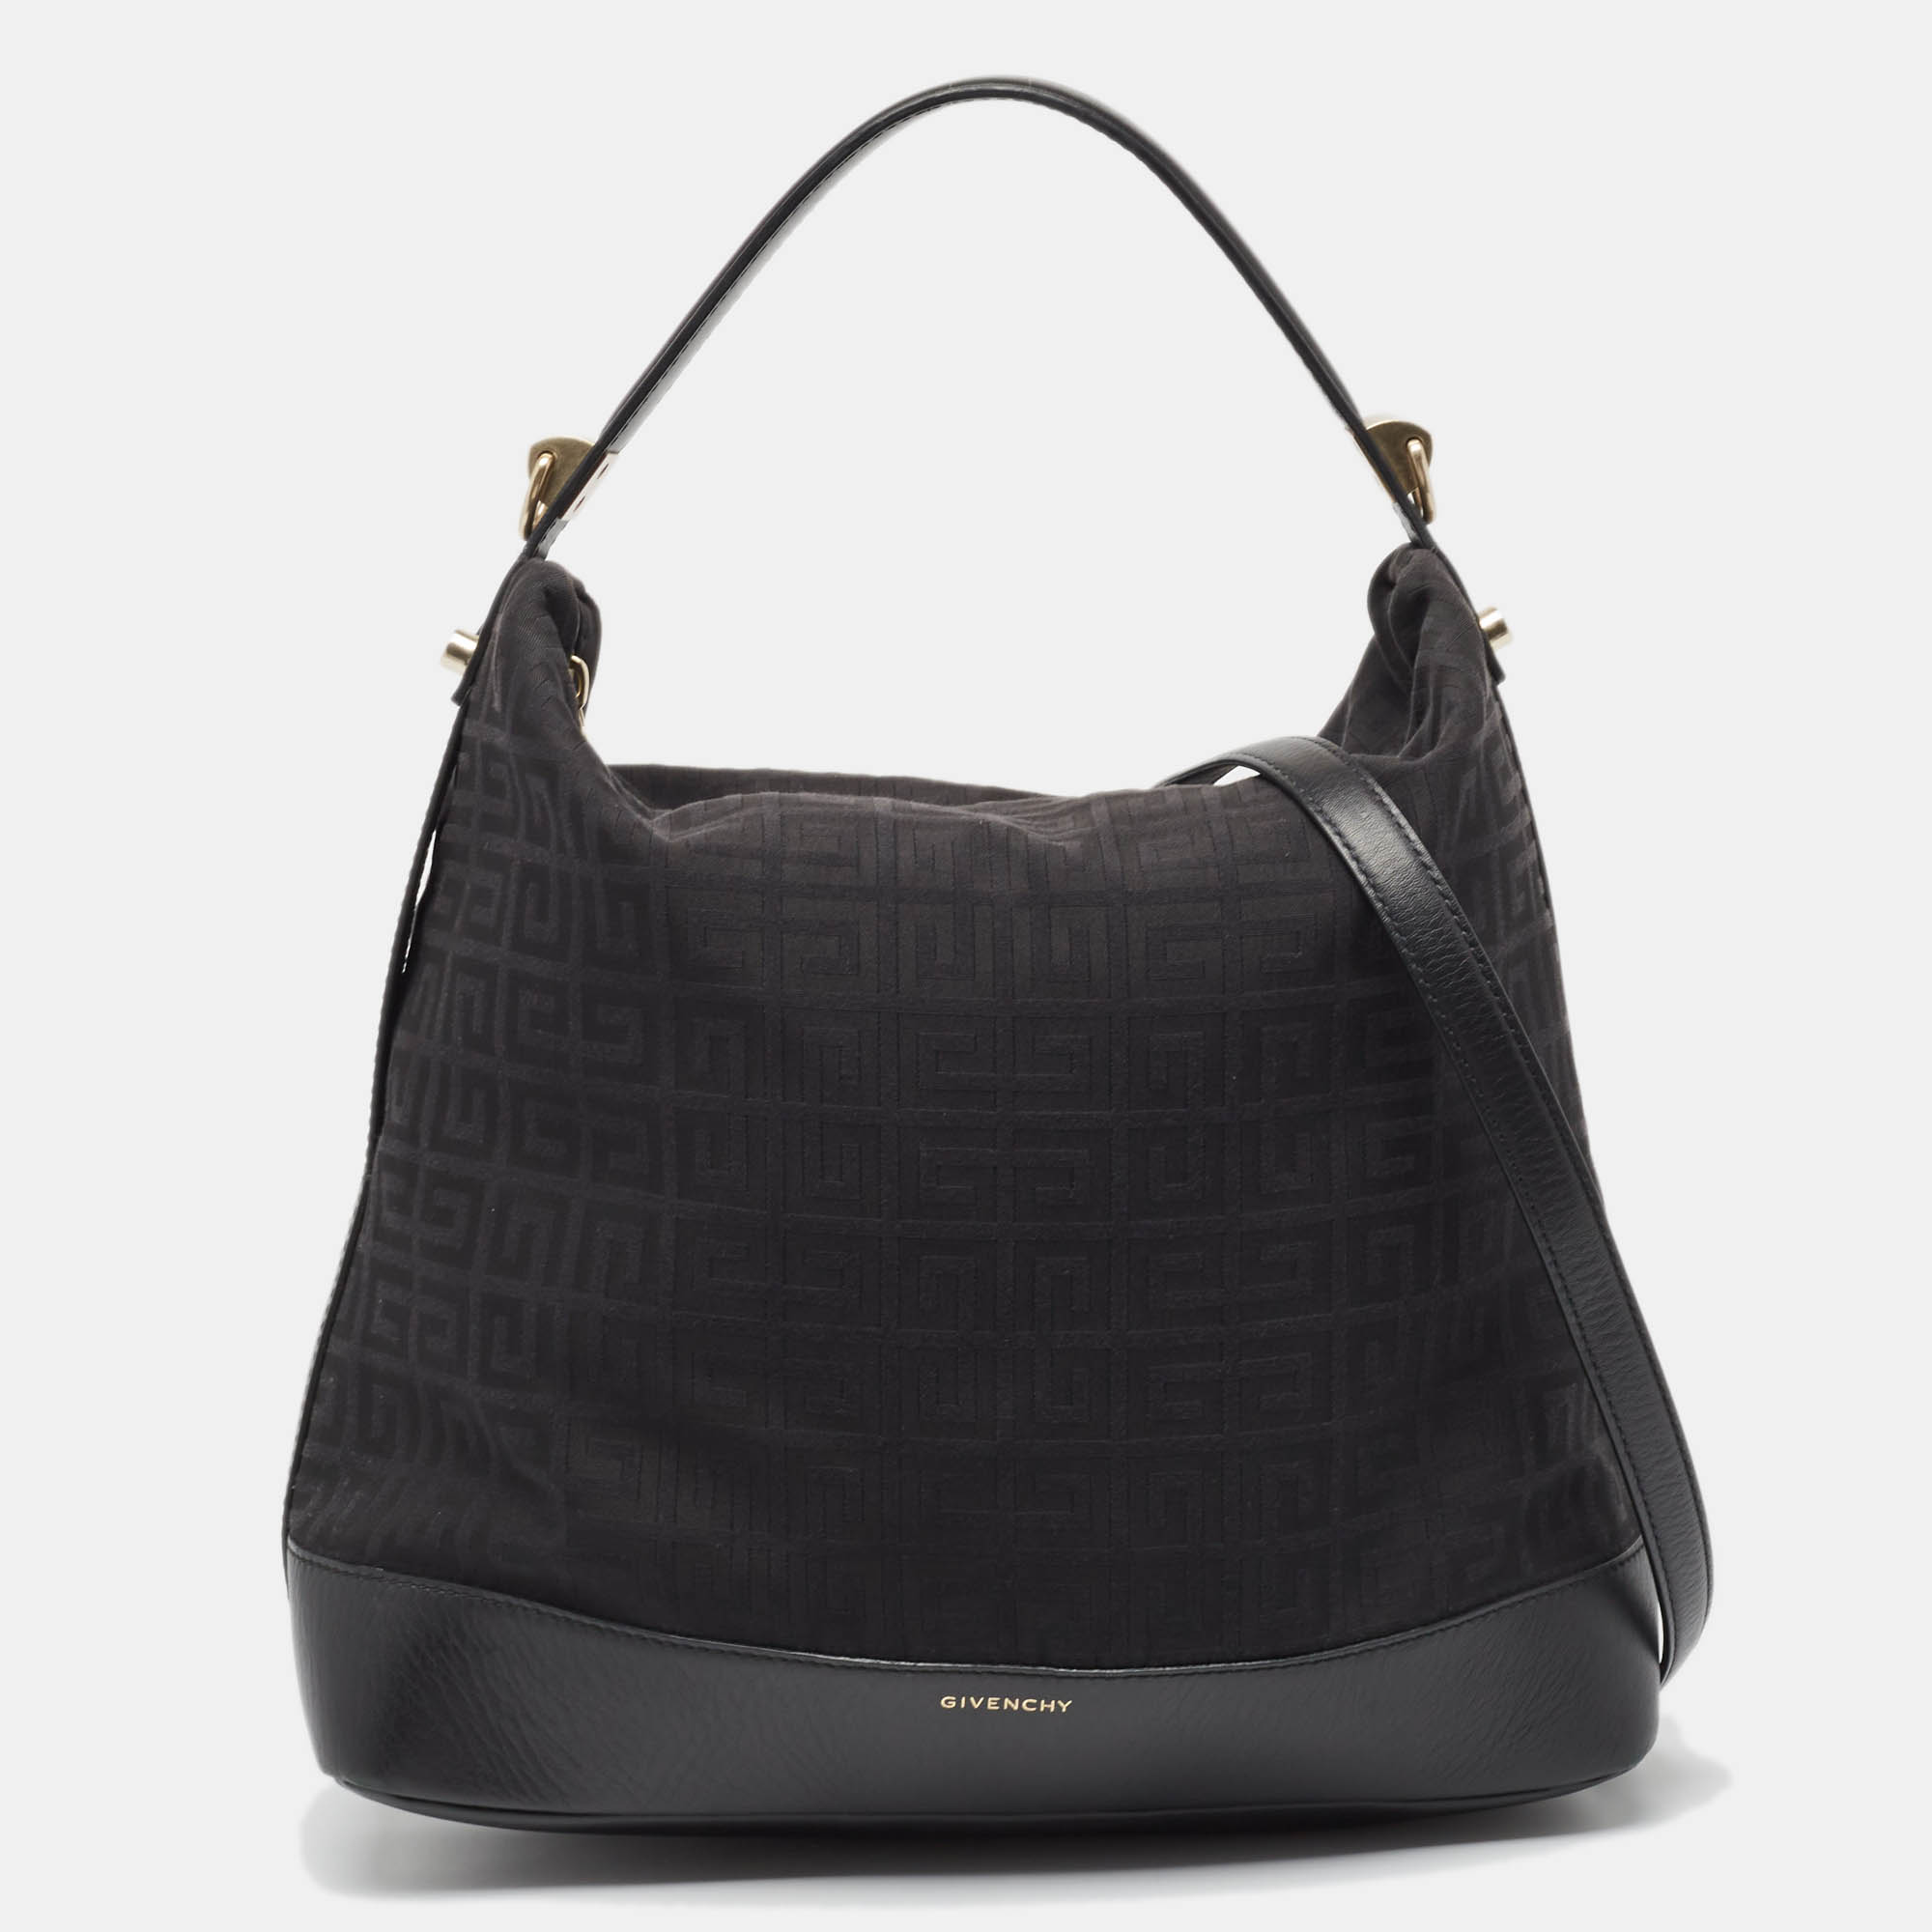 

Givenchy Black Monogram Canvas and Leather Bucket Bag